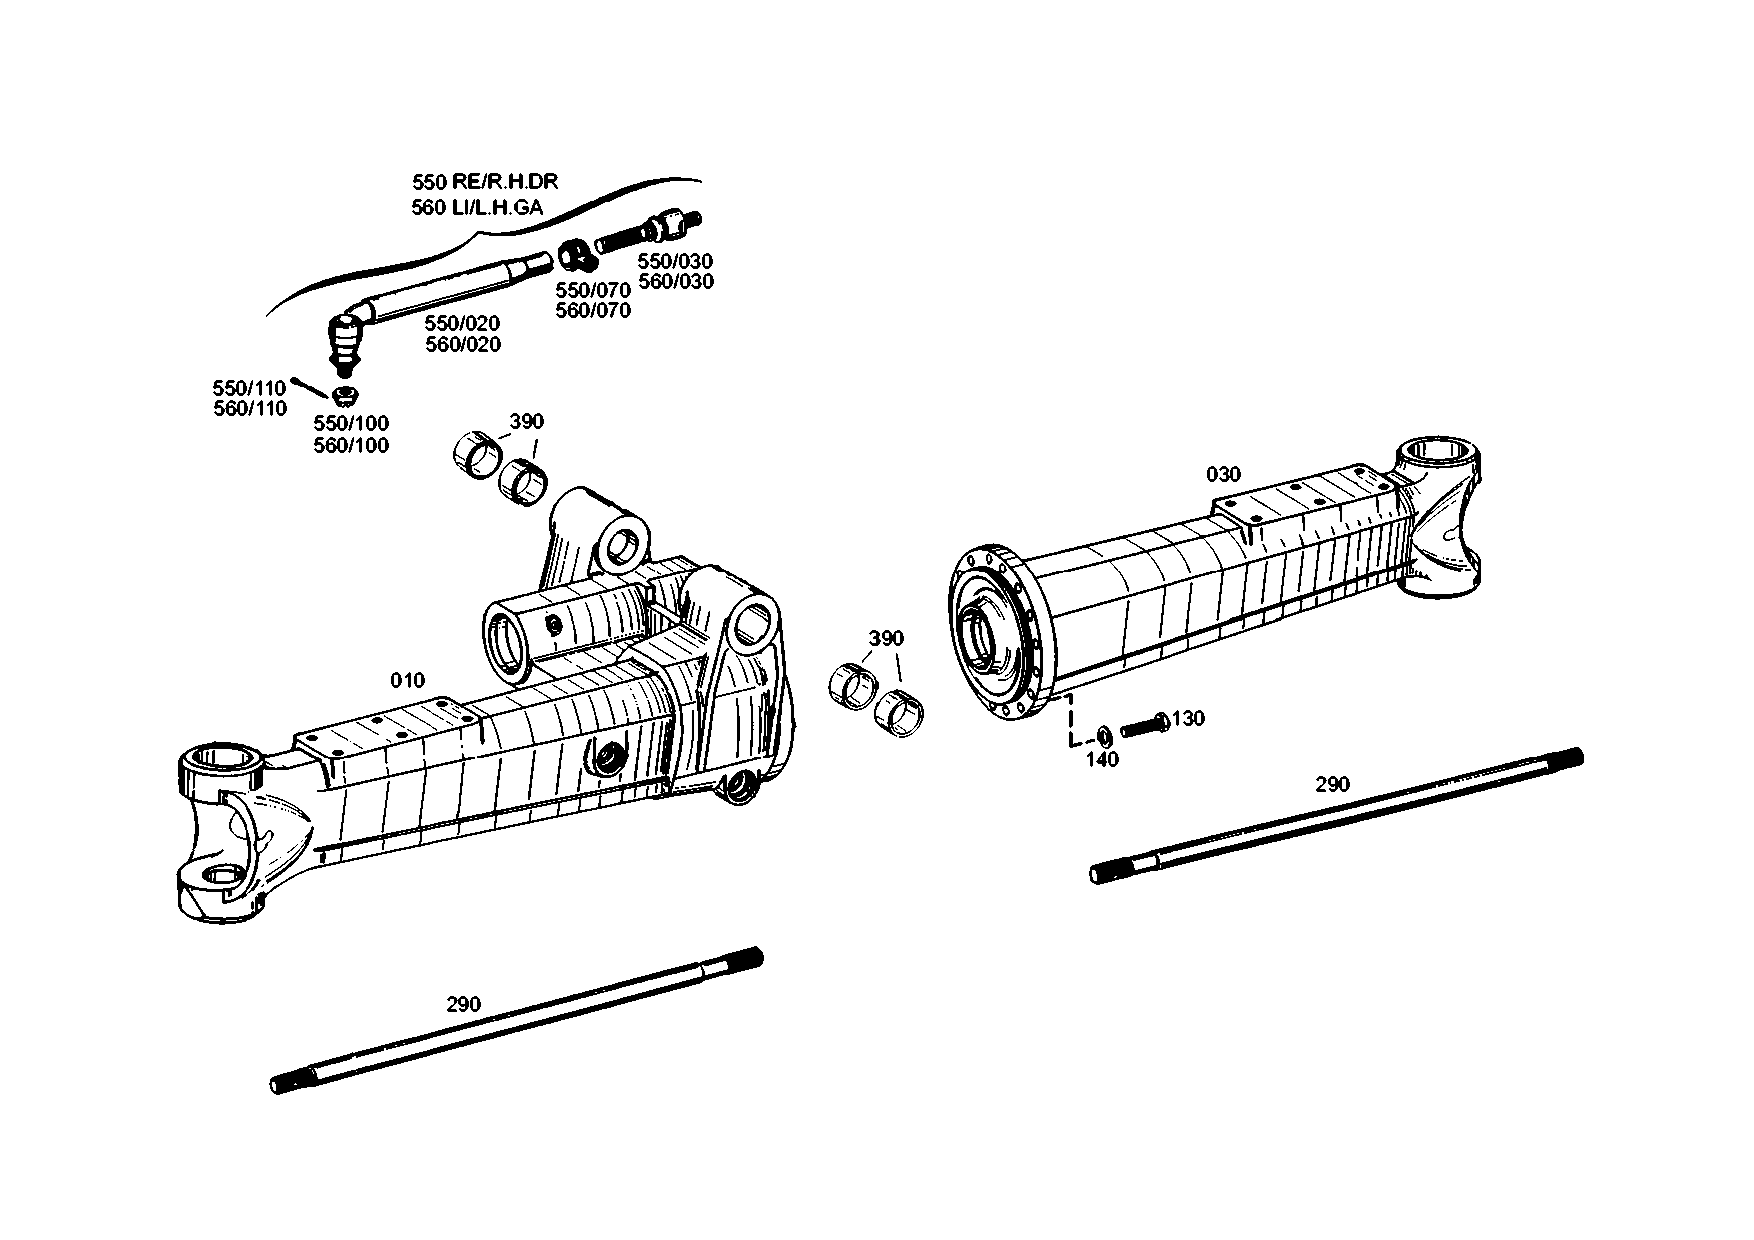 drawing for LIEBHERR GMBH 5007515 - TIE ROD (figure 2)